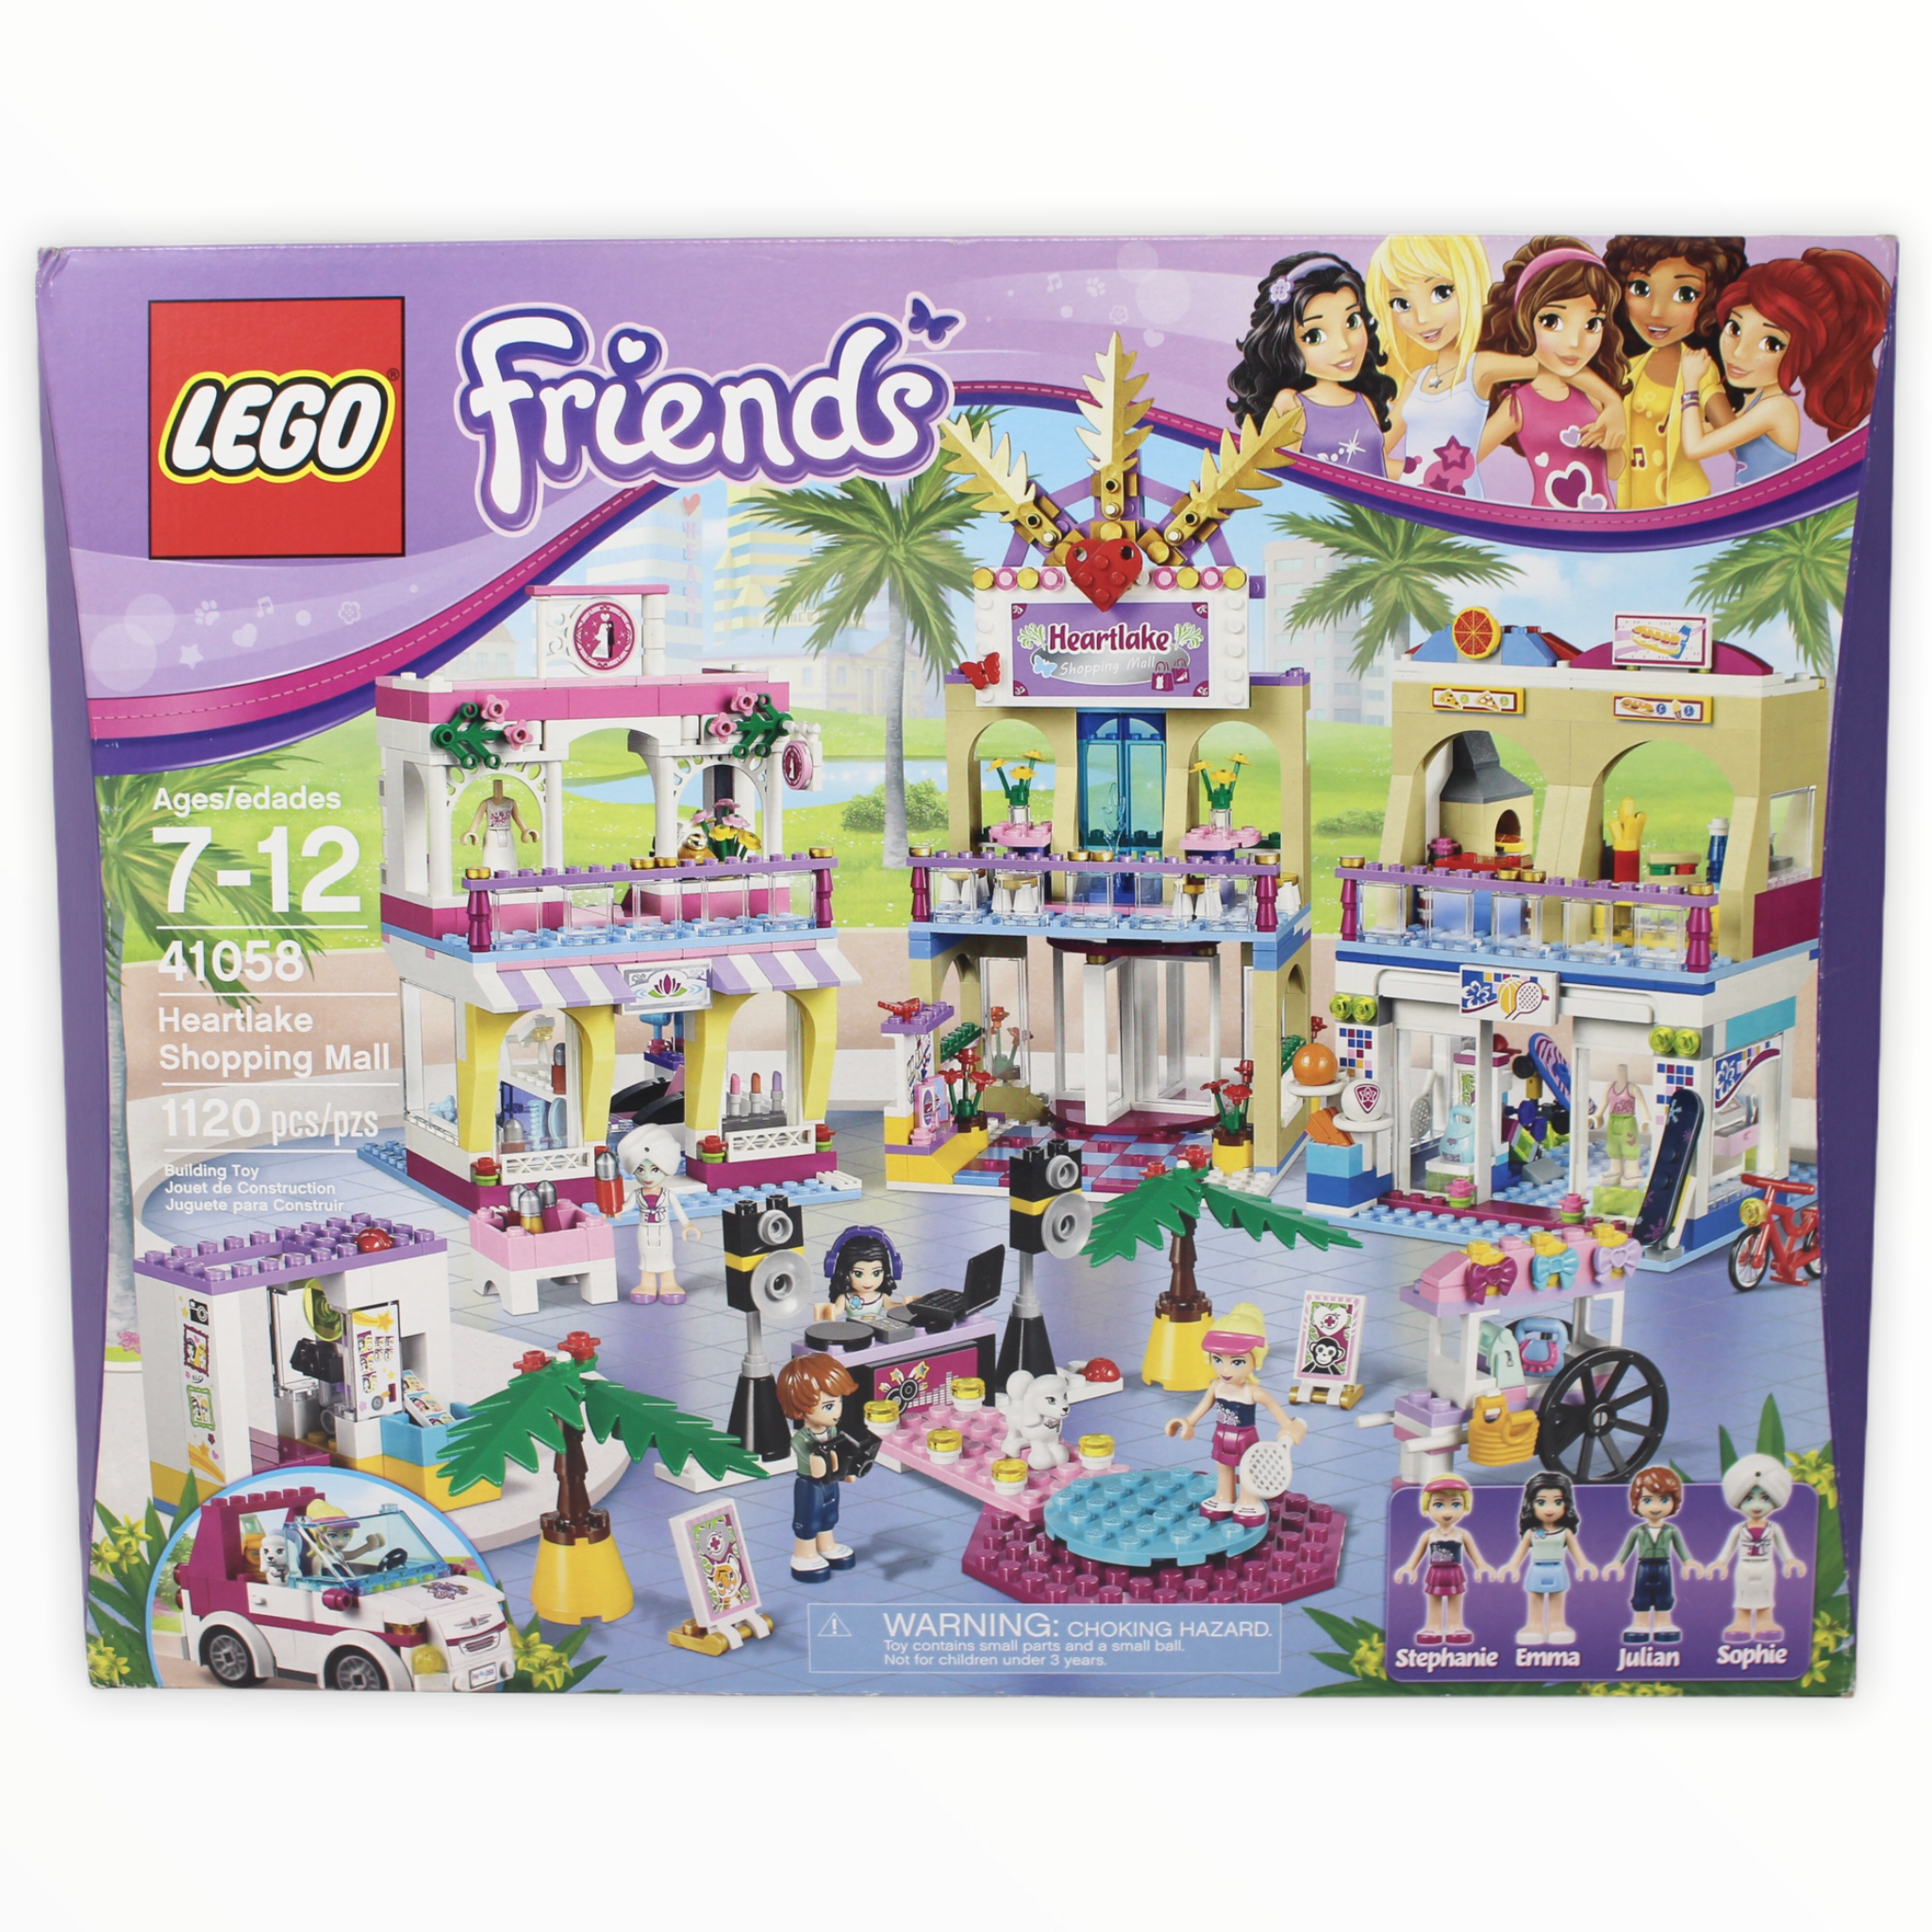 Certified Used Set 41058 Friends Heartlake Shopping Mall